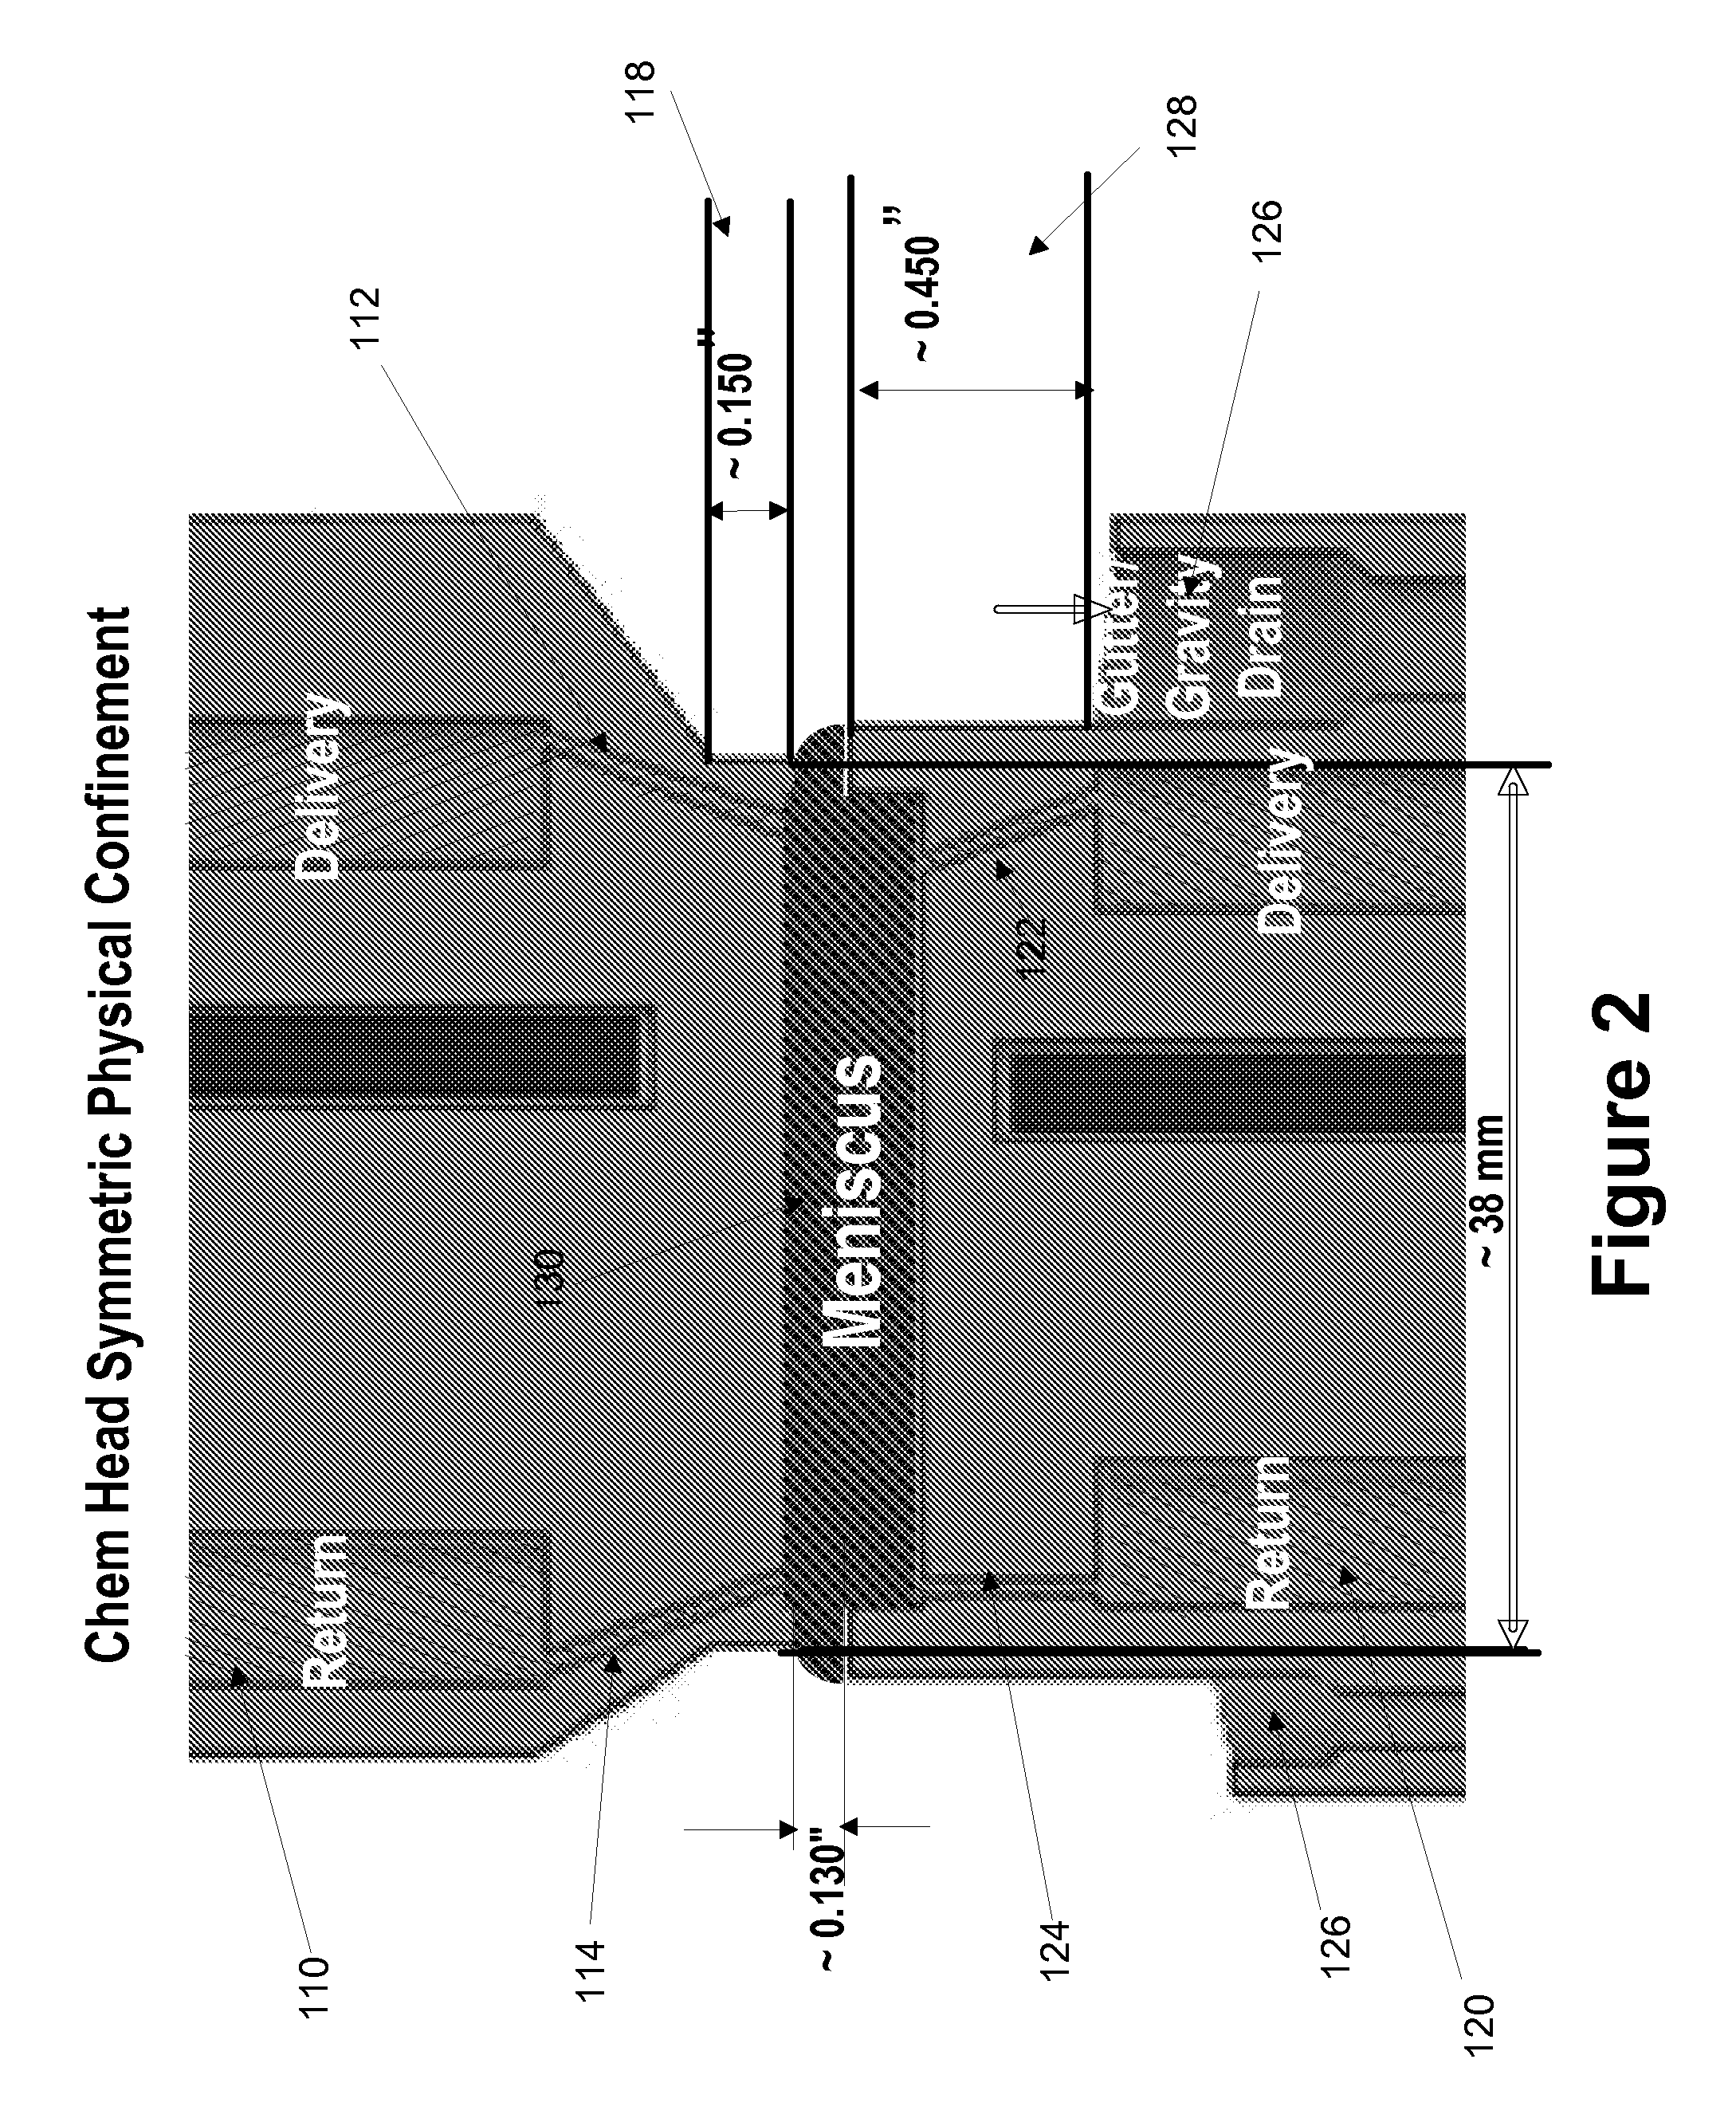 Method and Apparatus for Physical Confinement of a Liquid Meniscus over a Semiconductor Wafer